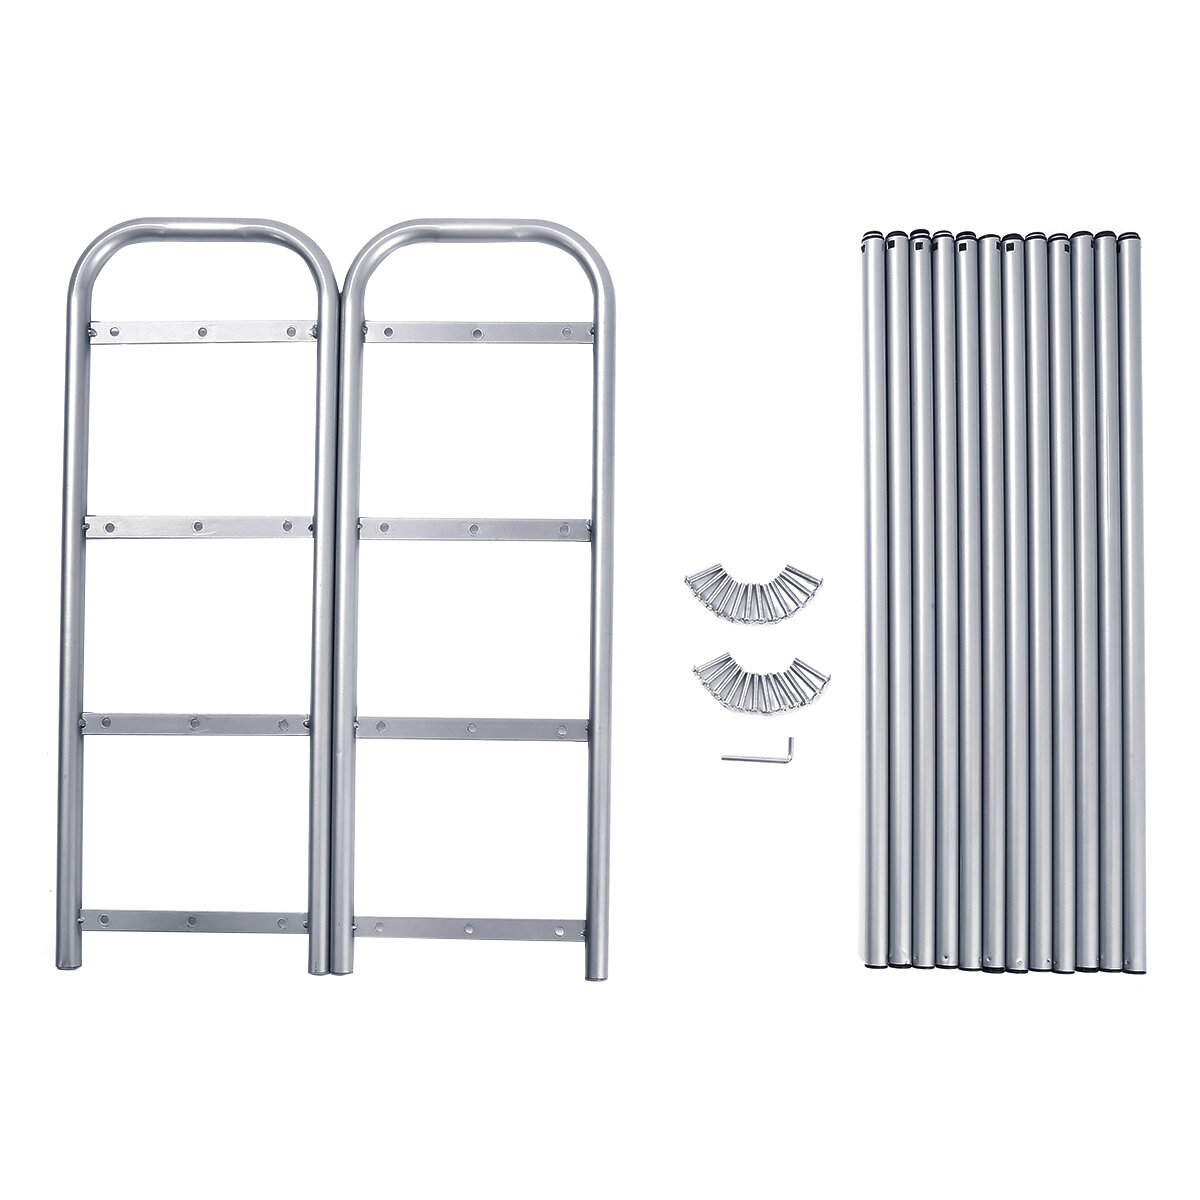 

GEMITTO Silver Grey4 Layers Extendable Shoe Organiser Racks Heavy Duty Shoe Stand Storage